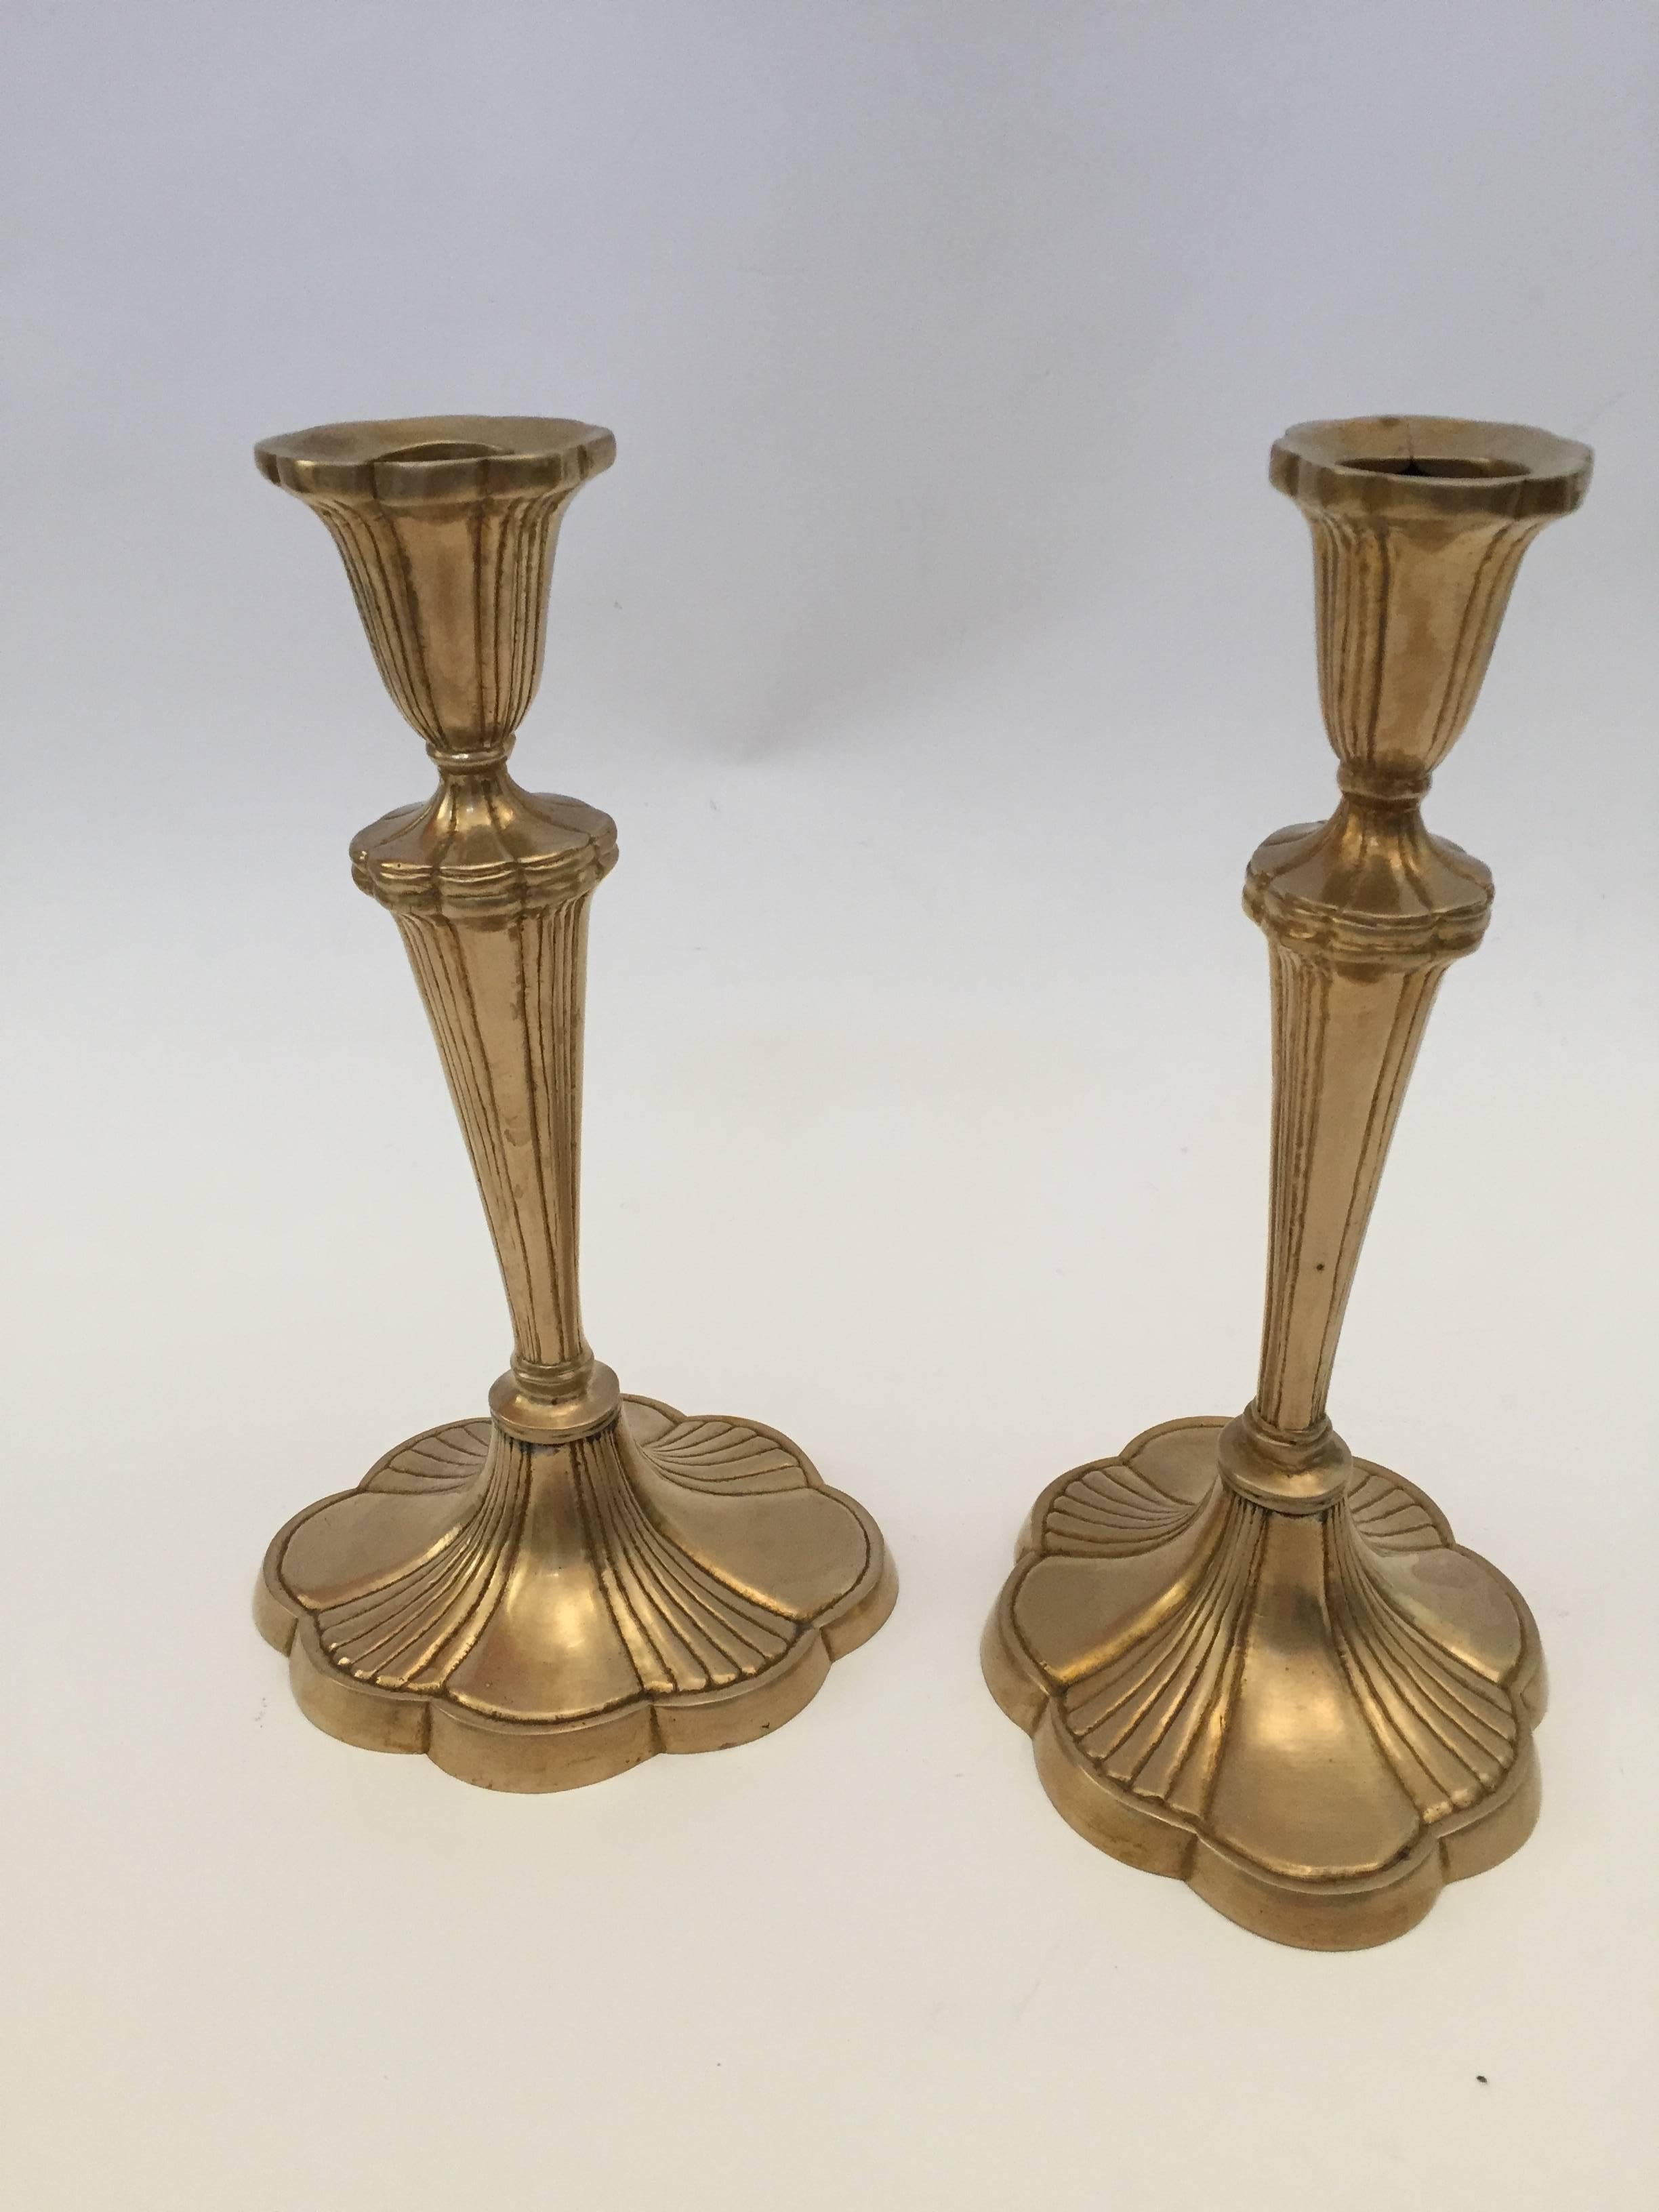 Hand-Crafted Pair of Art Nouveau Brass Candlesticks For Sale